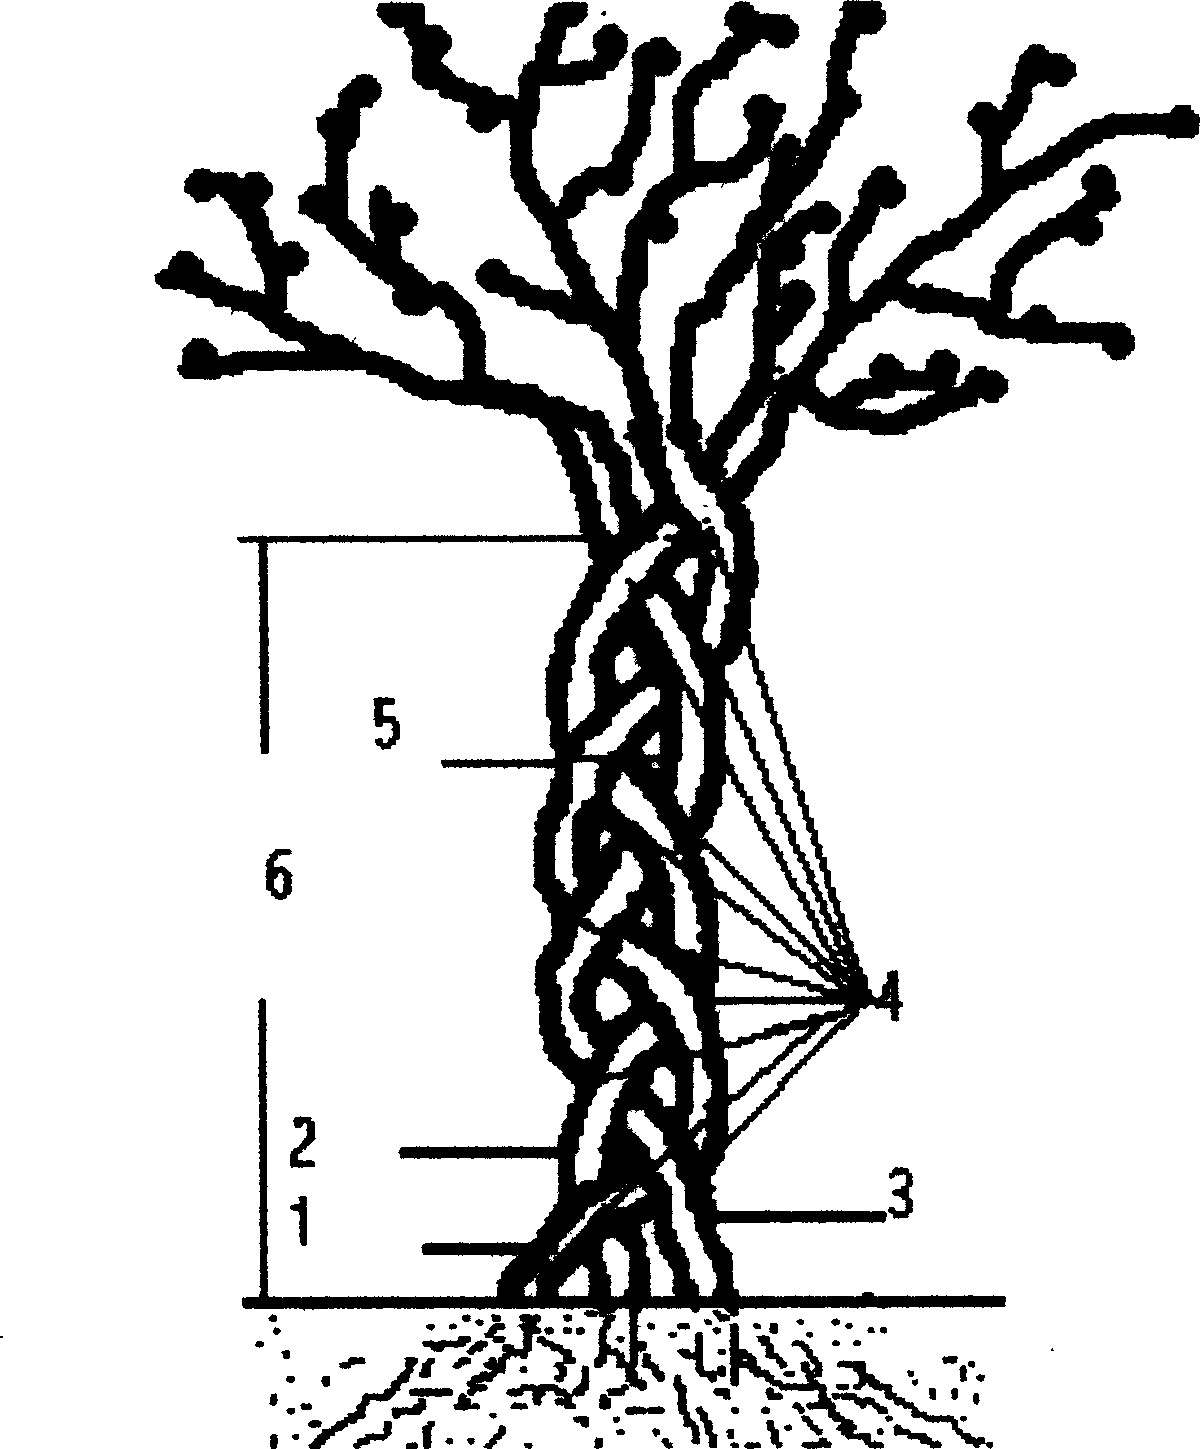 Combined plant shaping of multiple ligneous plant